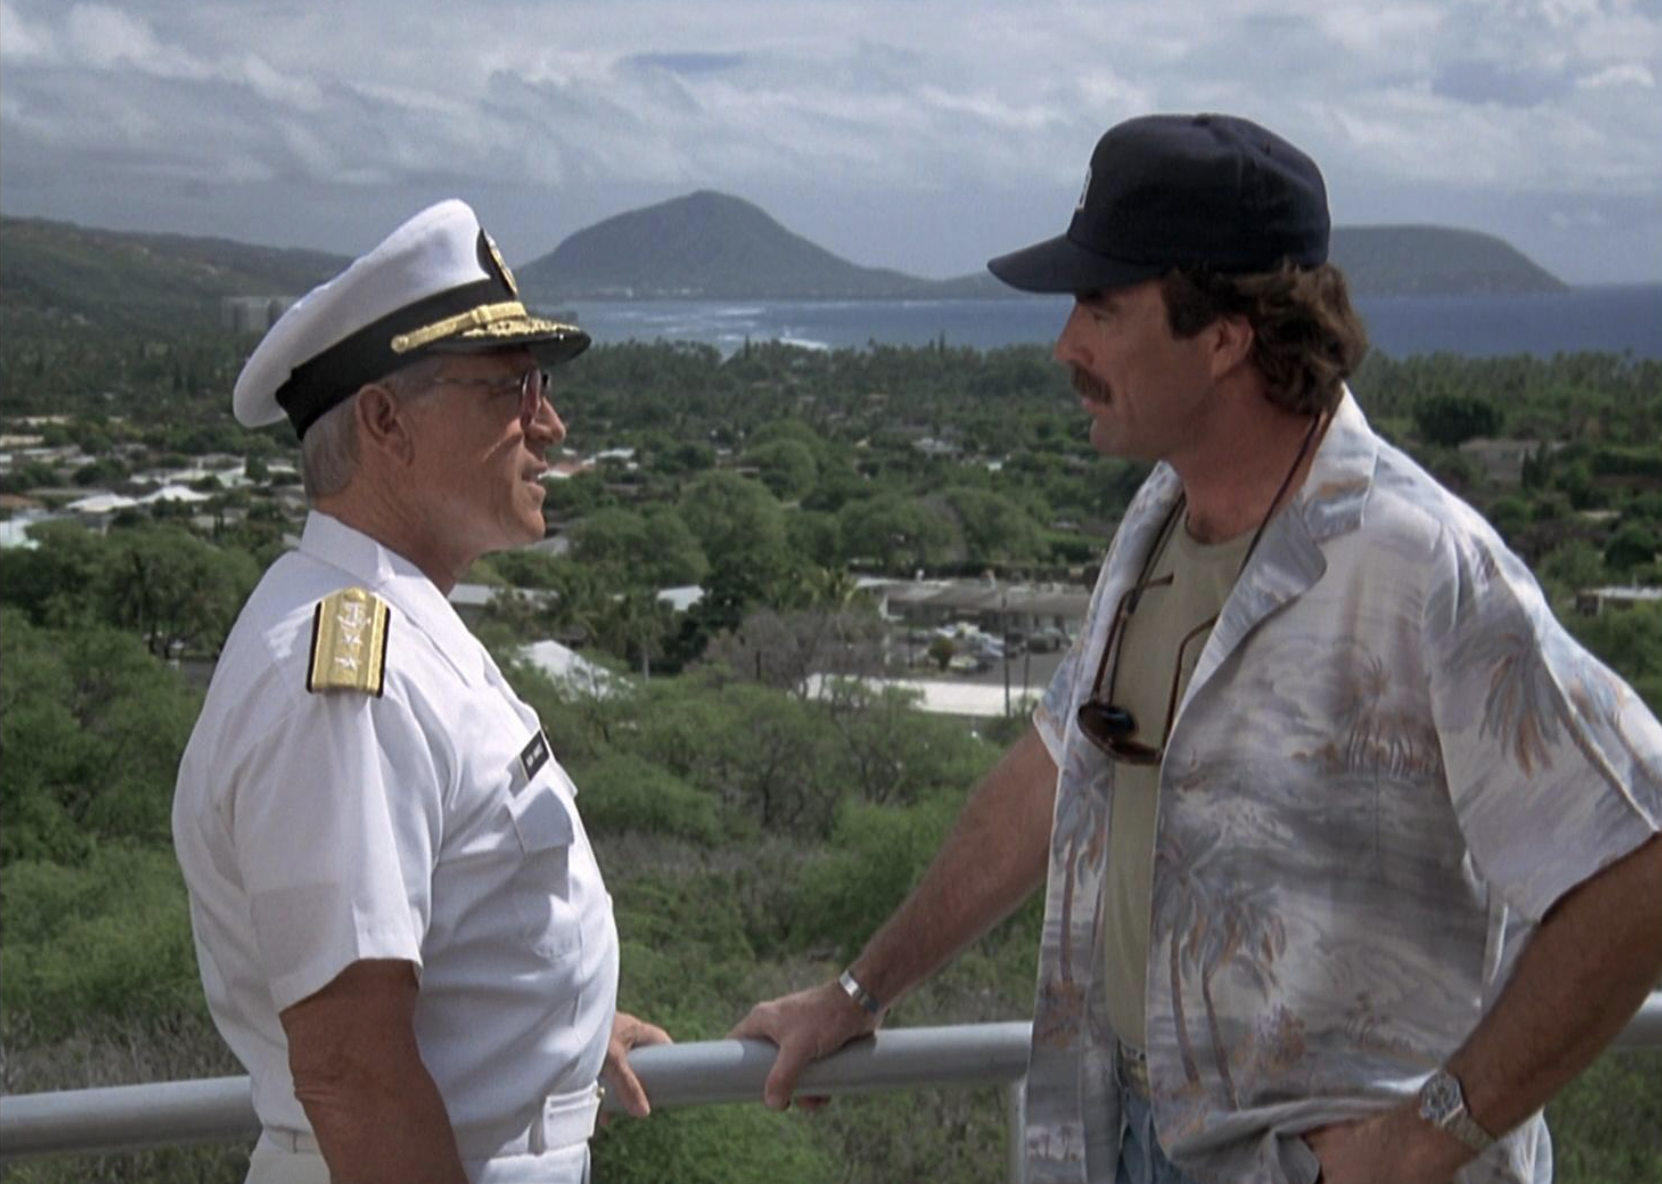 Tom Selleck and Paul Burke in "Magnum, P.I."